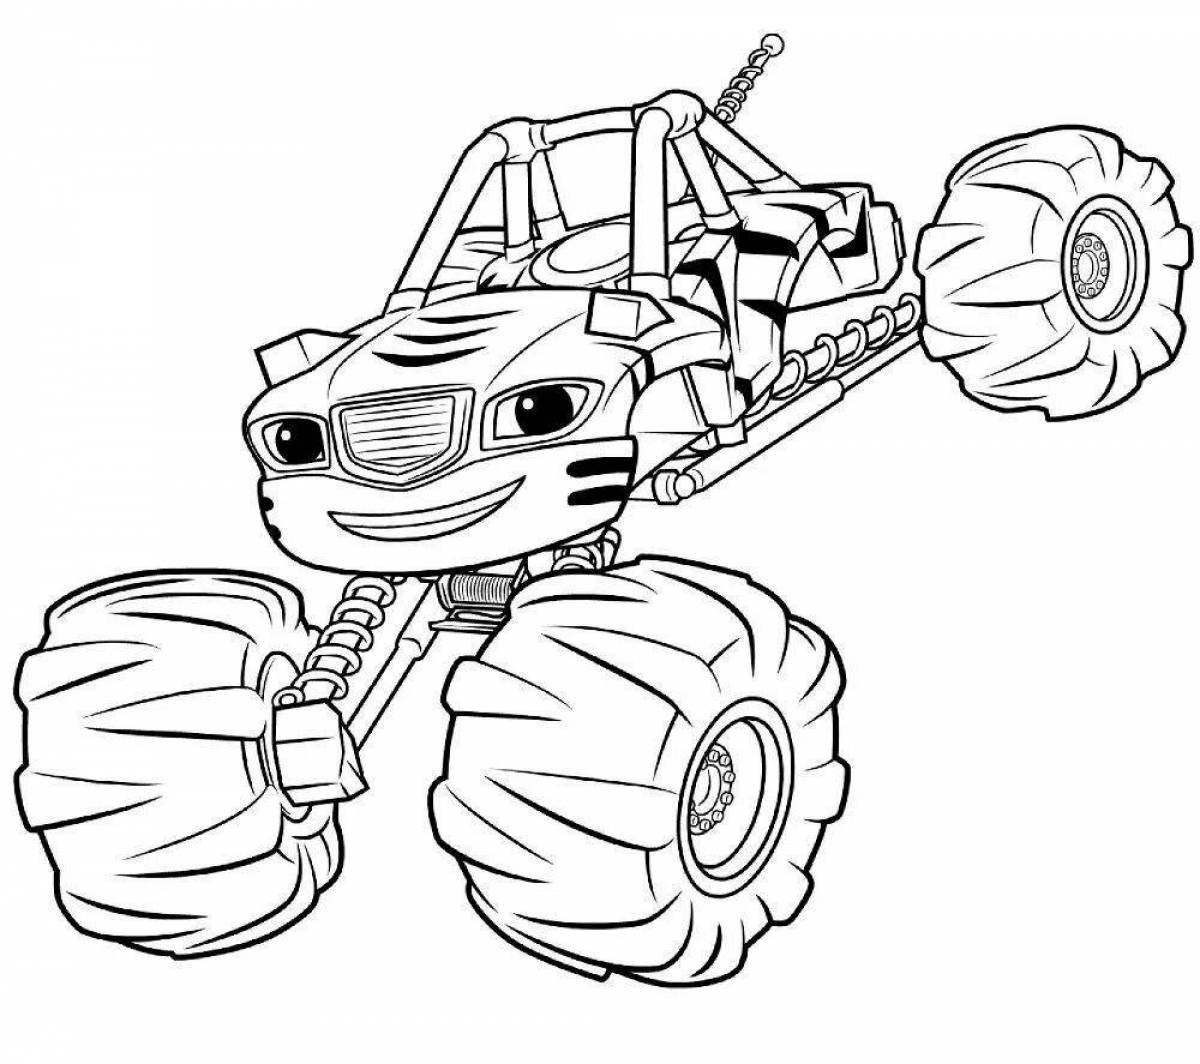 Animated flash machine coloring page